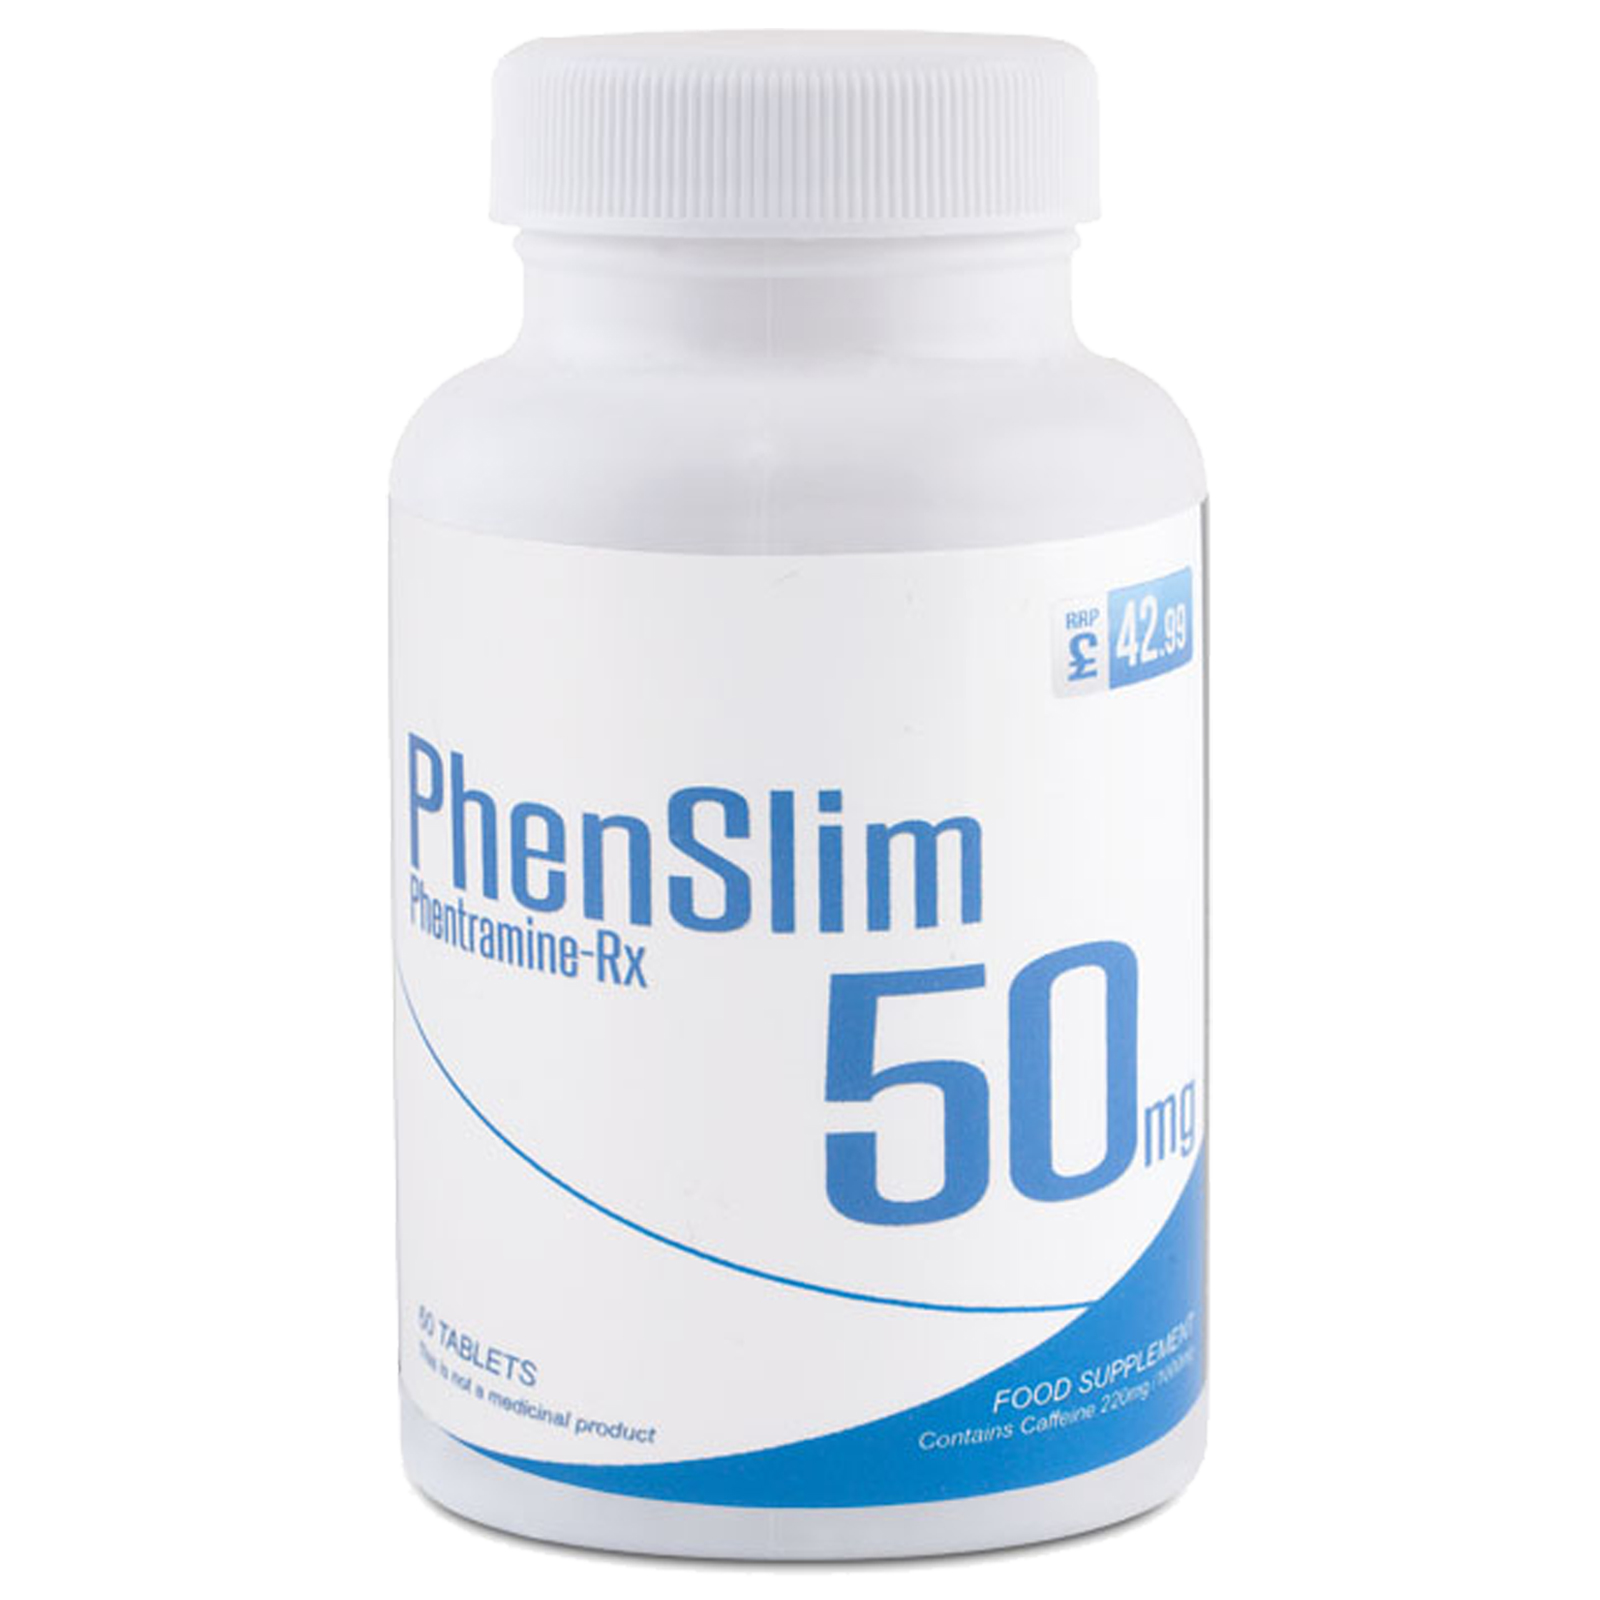 Atom PhenSlim 50mg Phentramine Rx Strong Slimming Pills Diet Weight Loss Tablets eBay